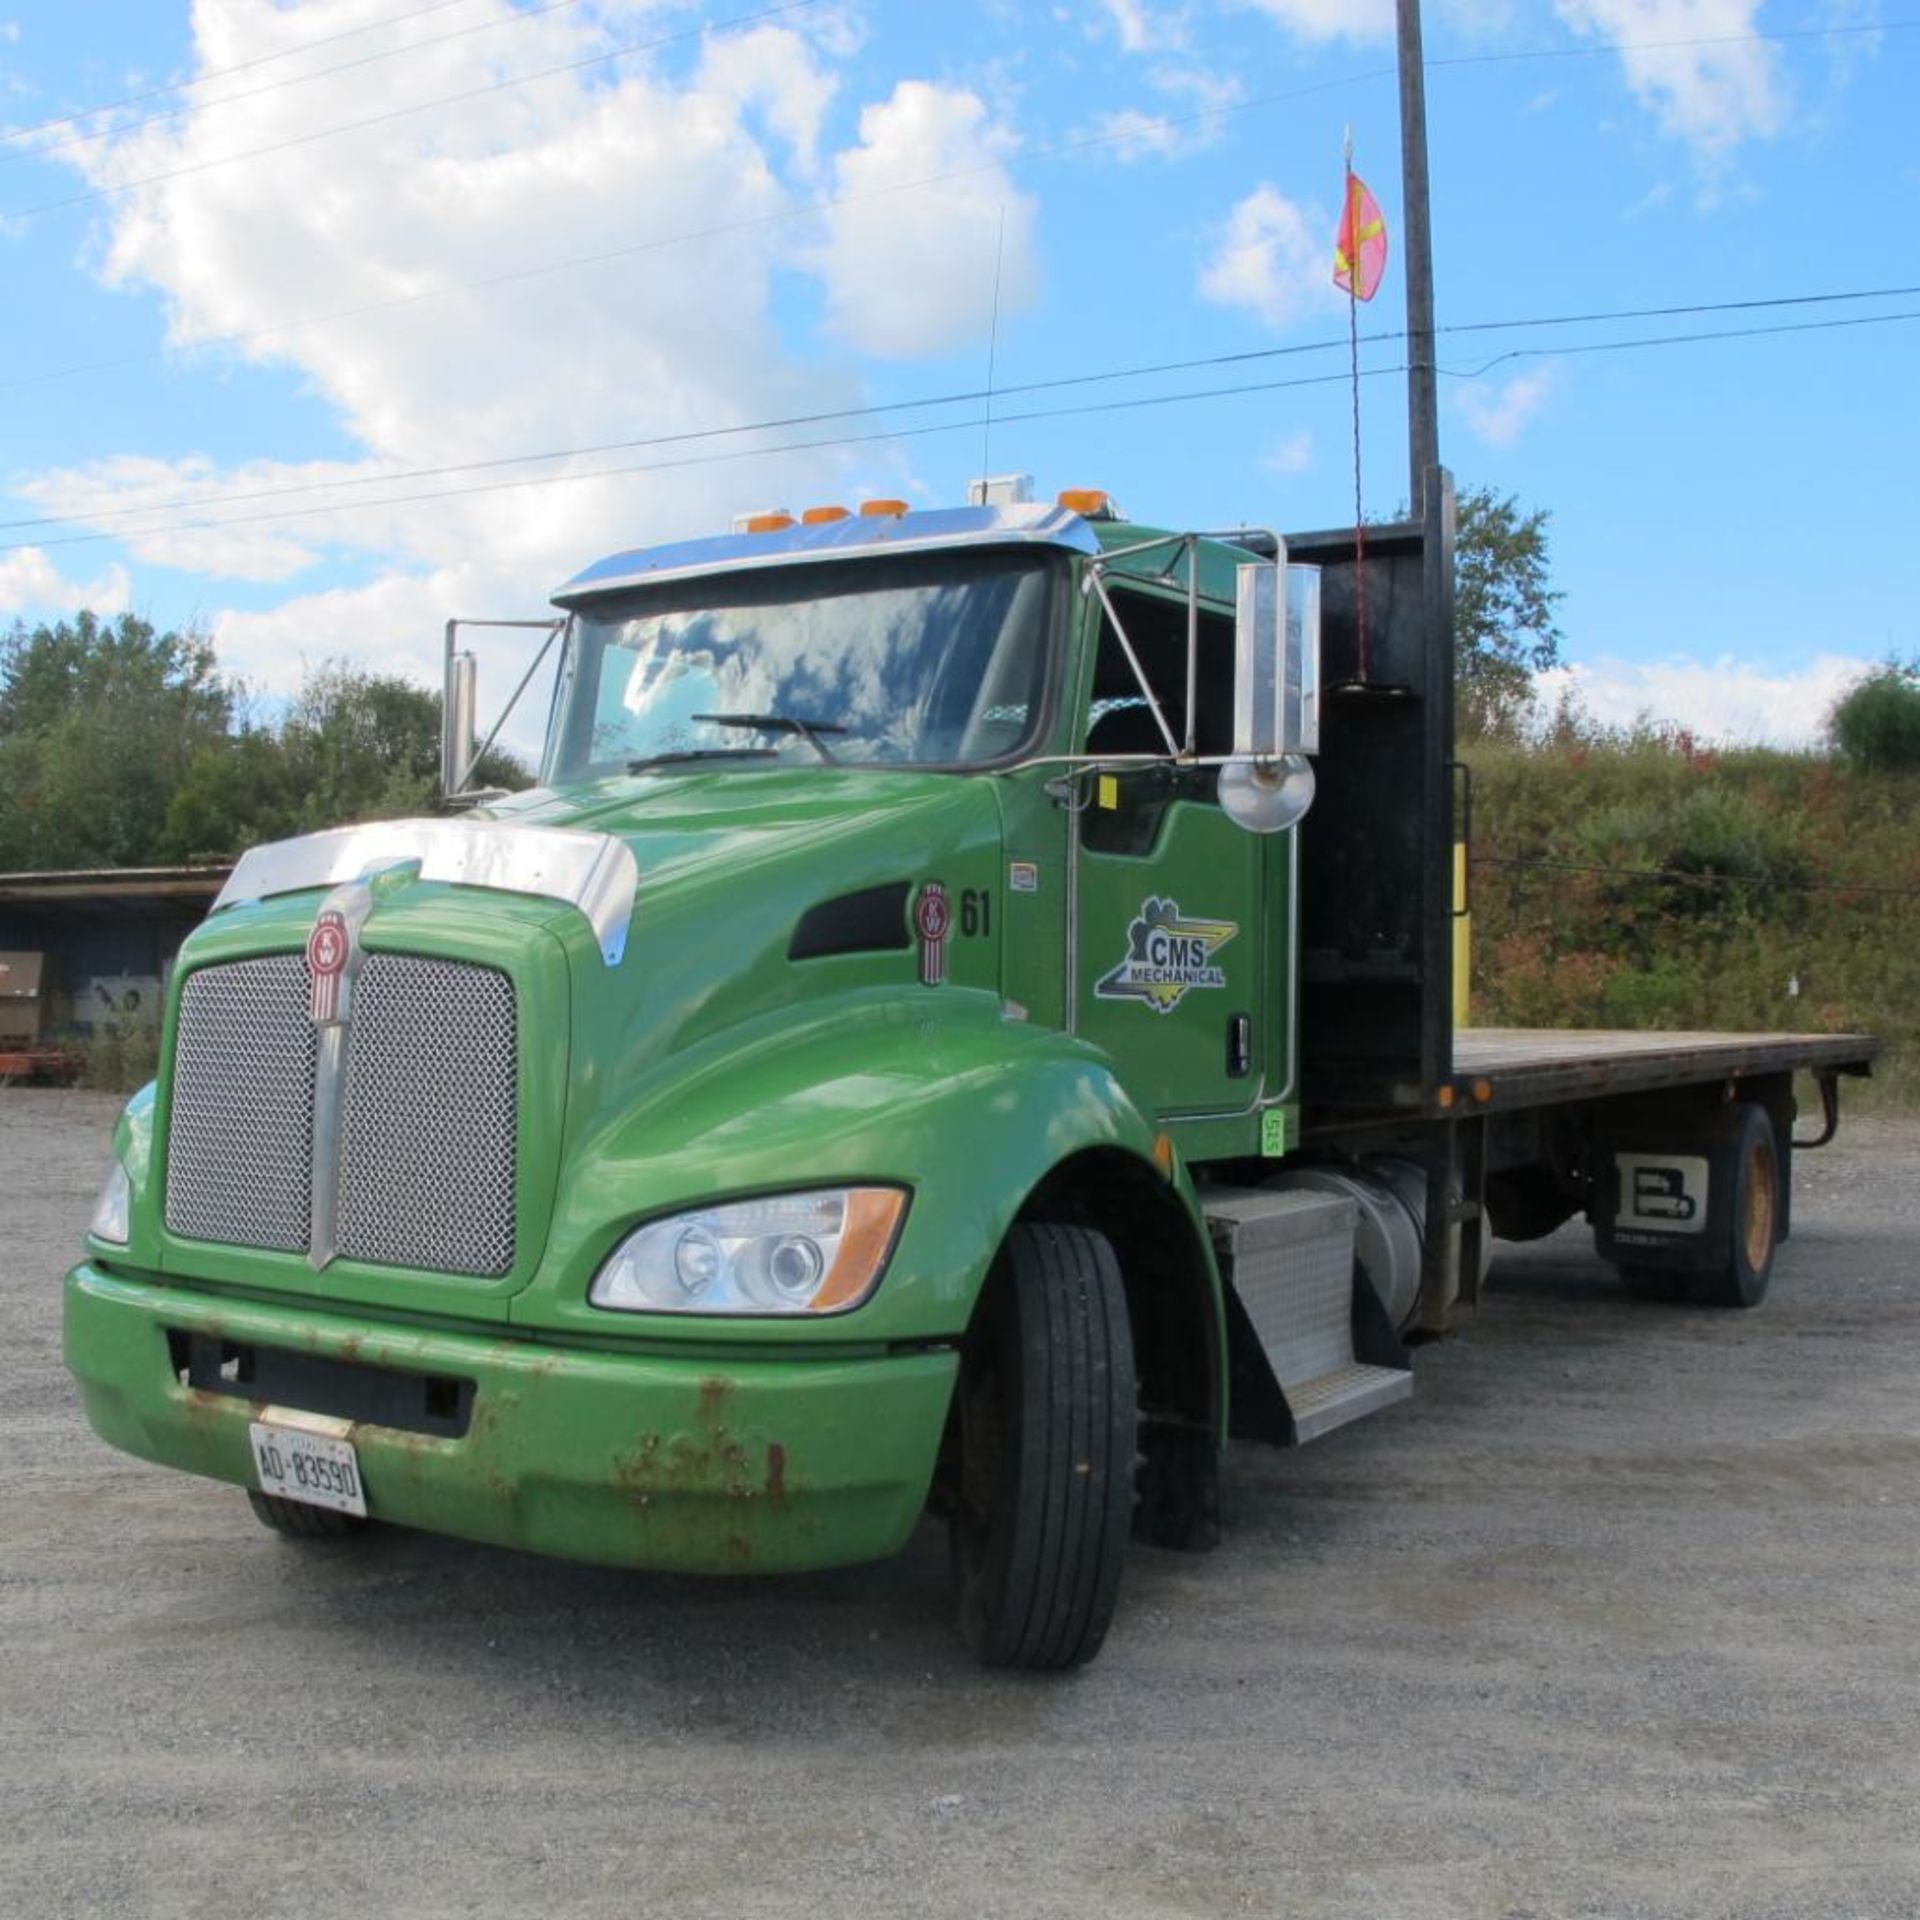 2013 KENWORTH FLAT DECK TRUCK MODEL T270, 96009 KM INDICATED, 2609 HRS, (APPROX) 24' WOOD DECK, SING - Image 2 of 11